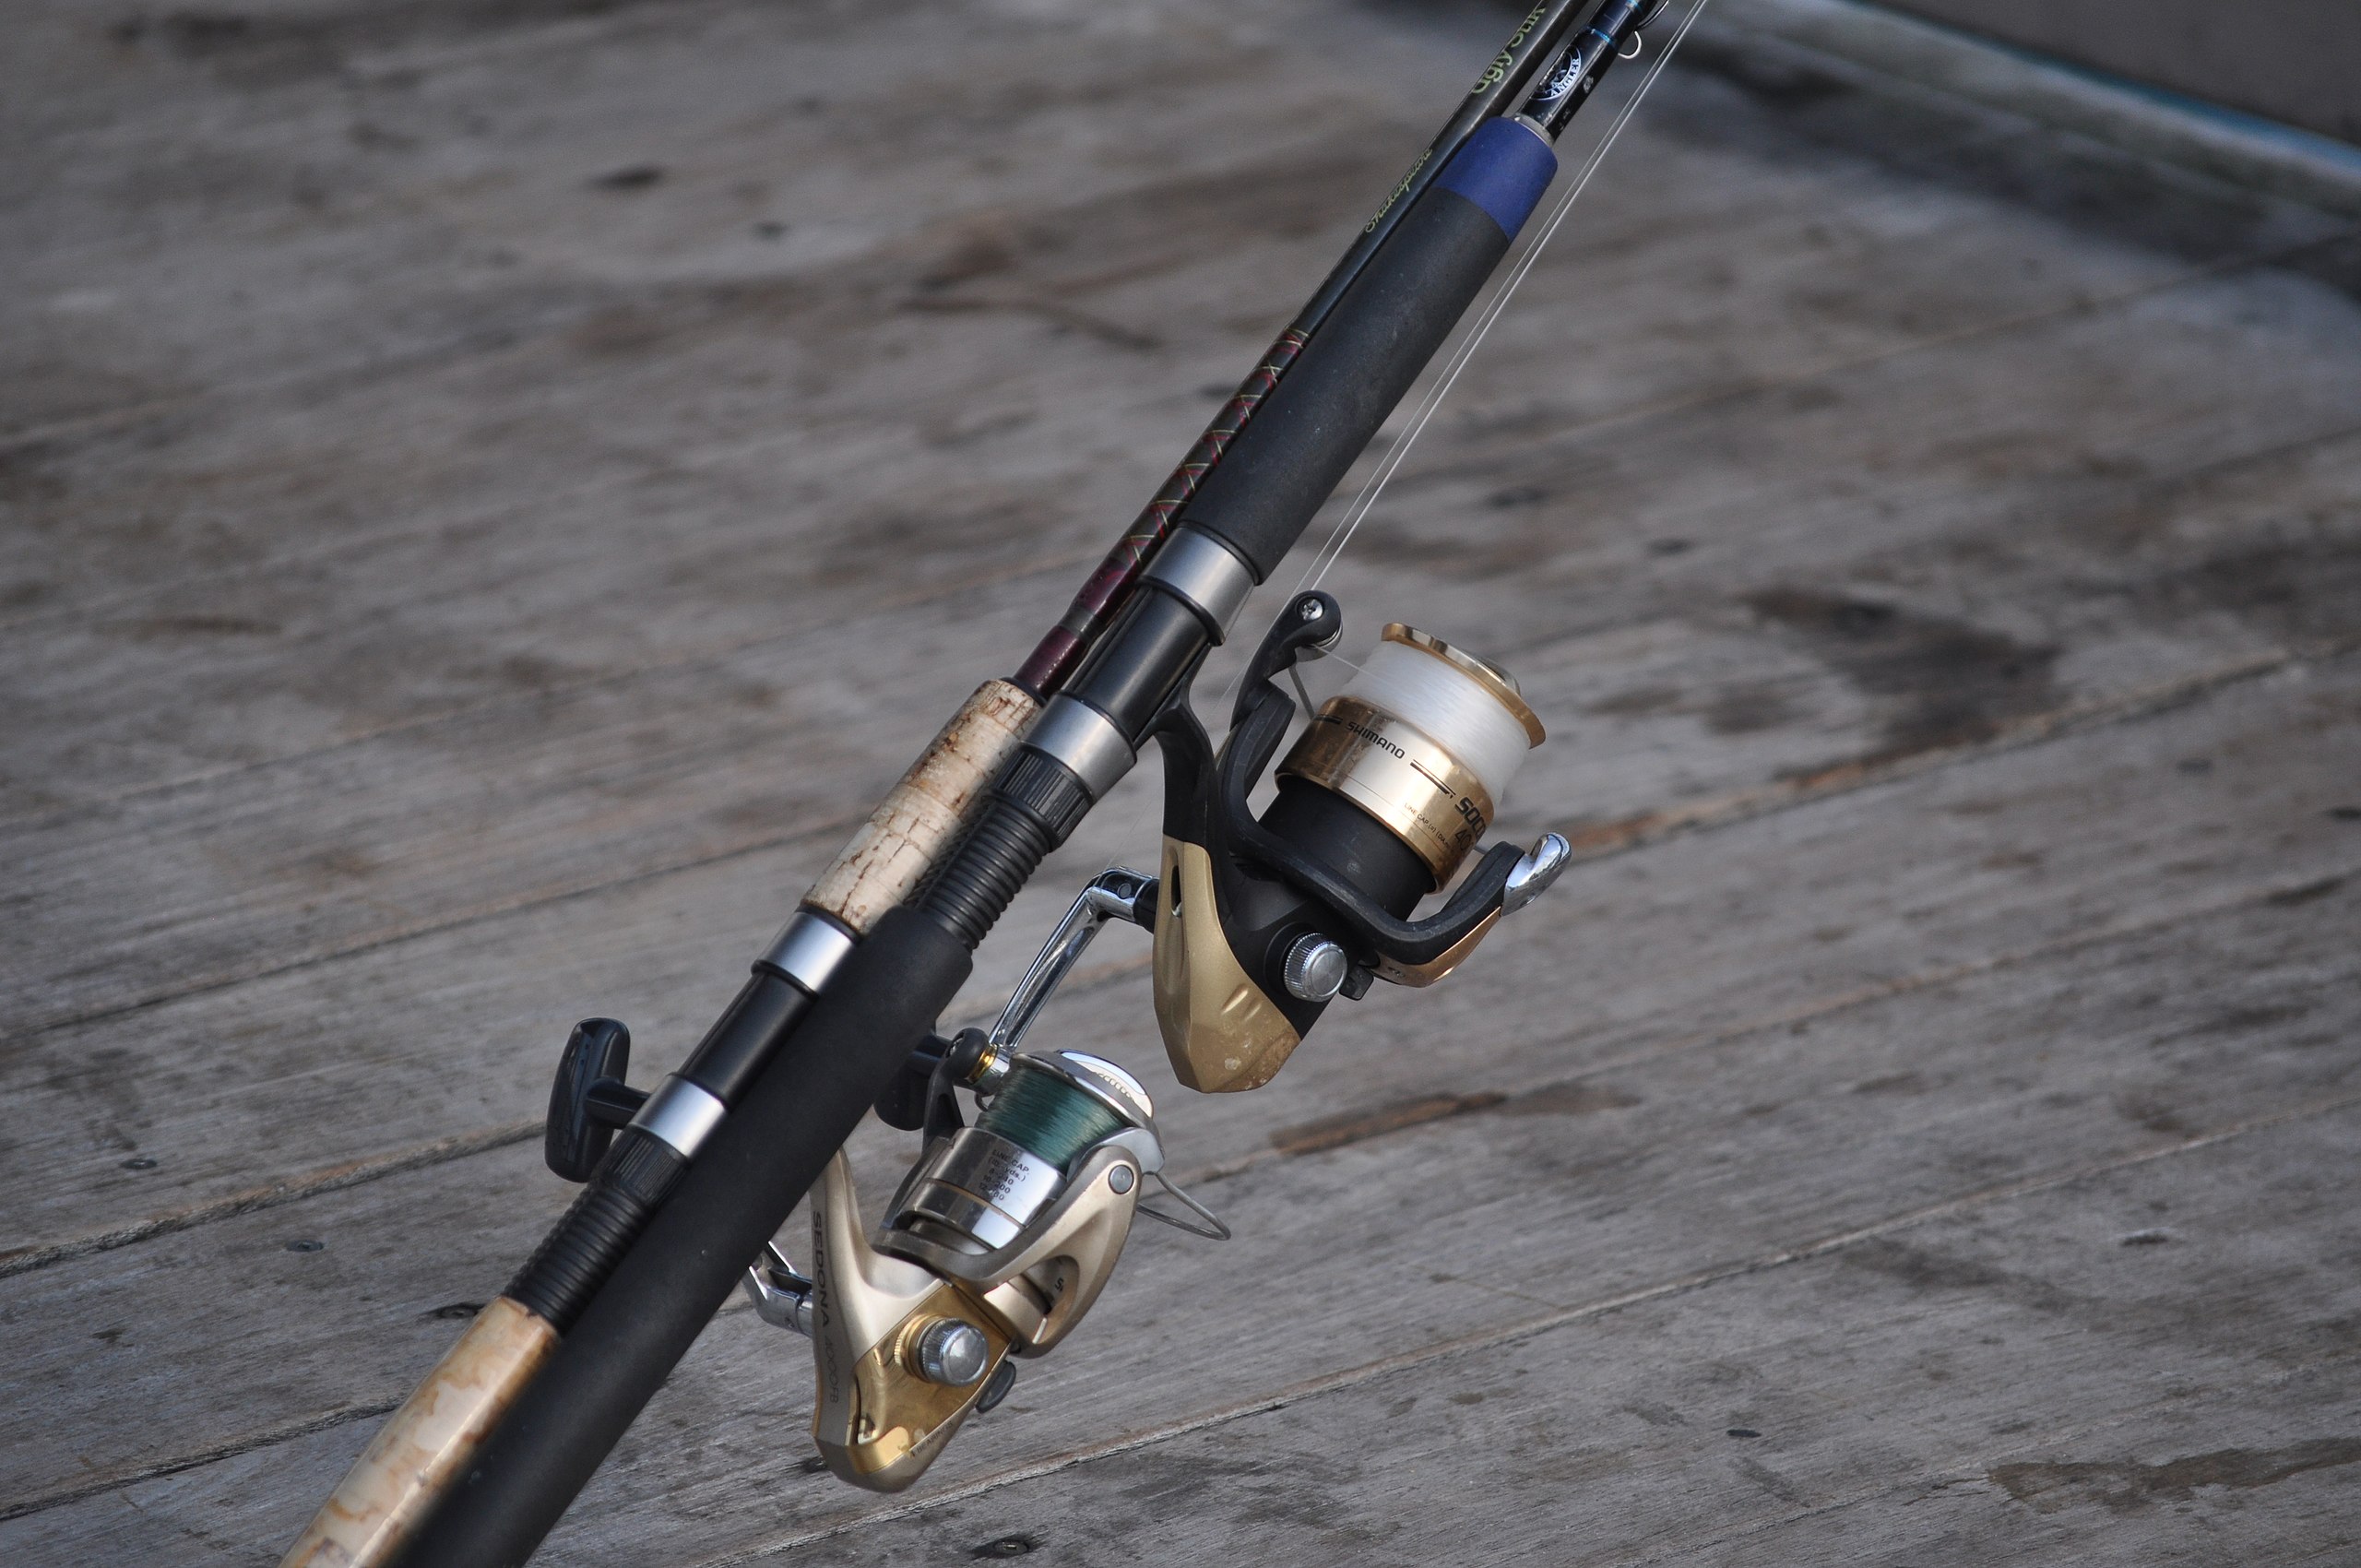 File:Two spinning fishing reels on pier.JPG - Wikimedia Commons